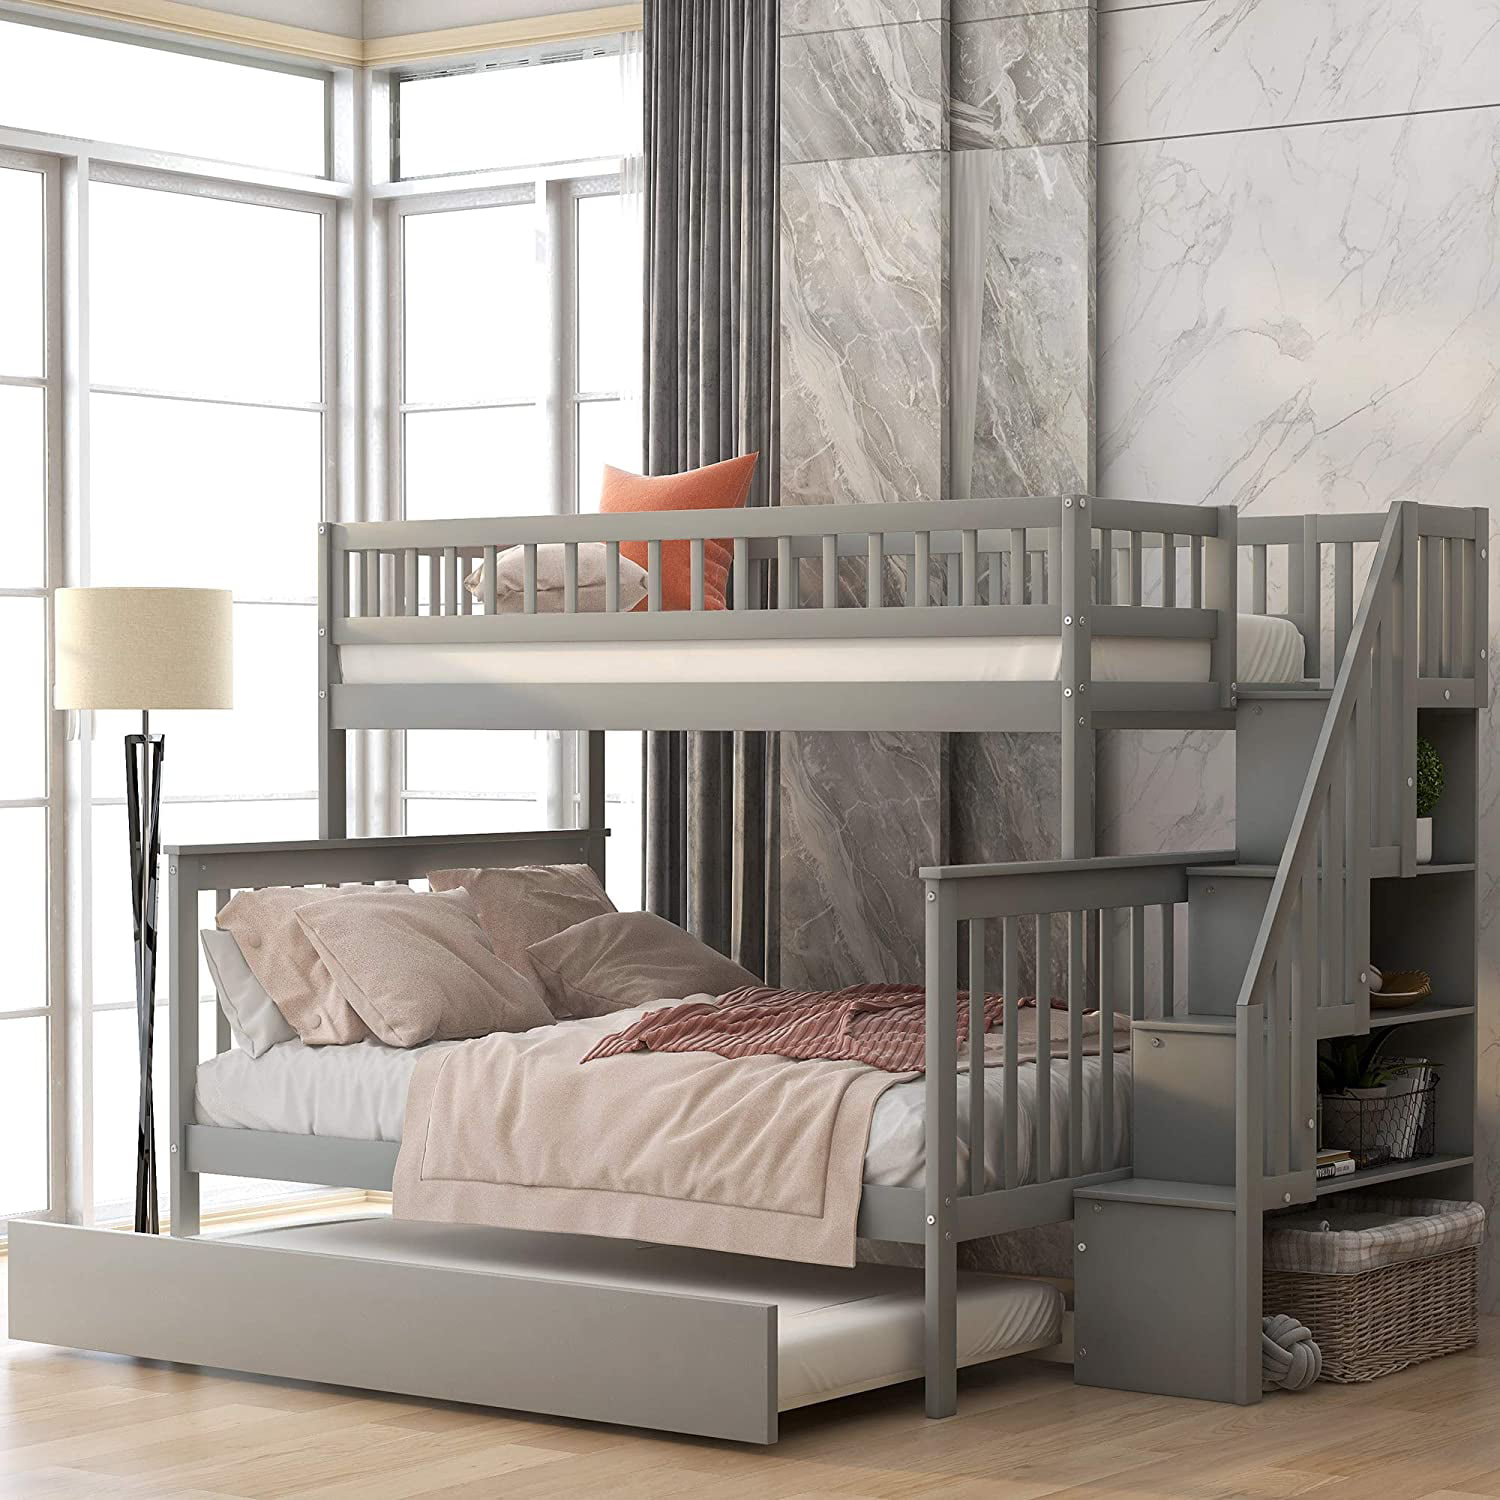 Piscis Bunk Bed Beds Twin Over, Twin Over Toddler Bunk Bed